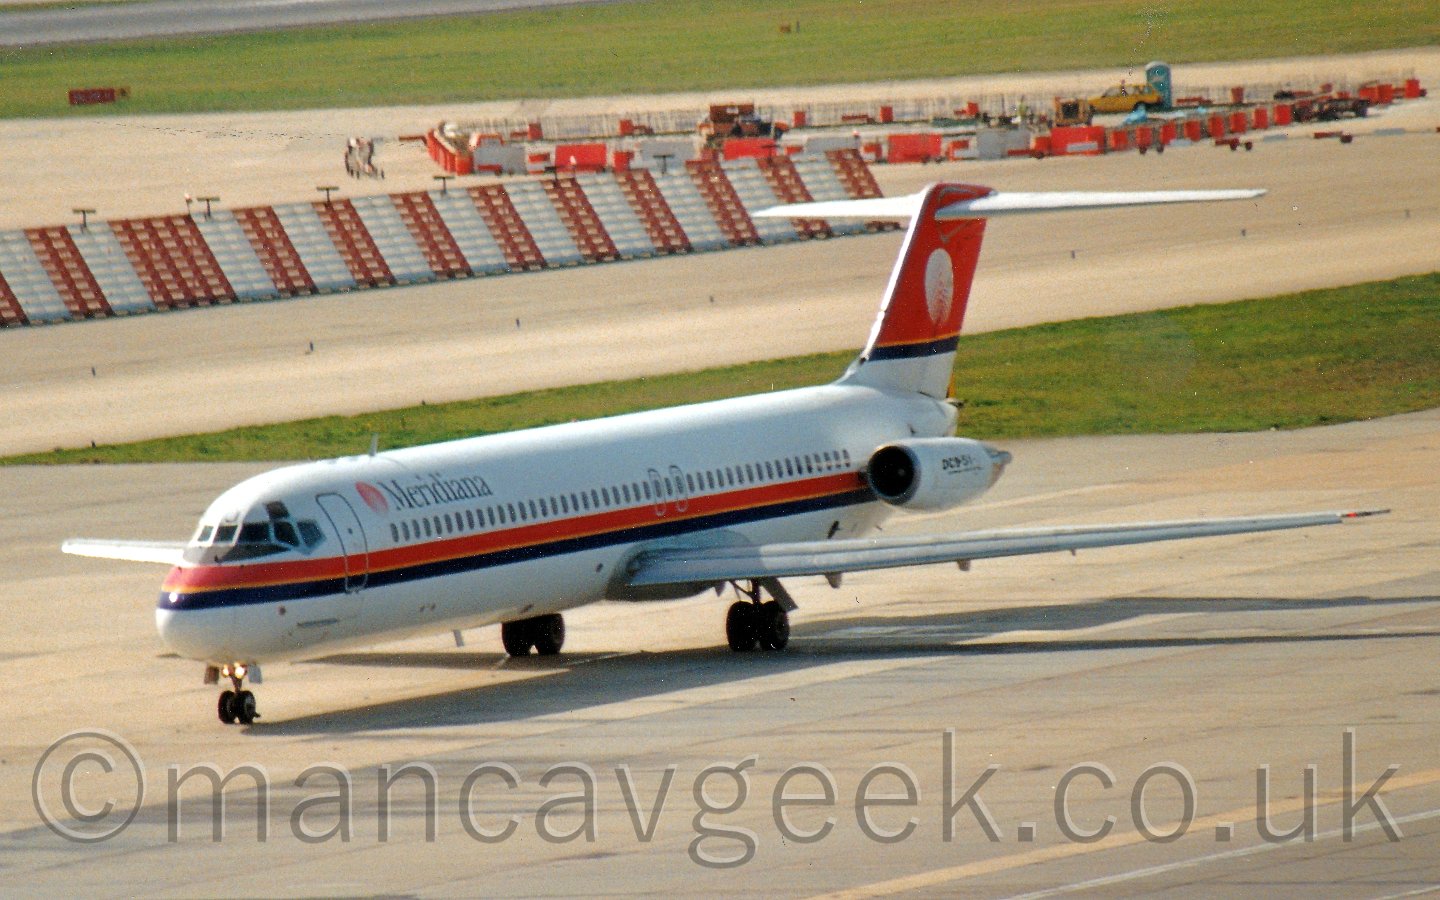 Side view of a white, red, and black twin engined jet airliner with the engines mounted on the rear fuselage, taxiing from right to left, with a building site at the site of one of the taxiways in the background.